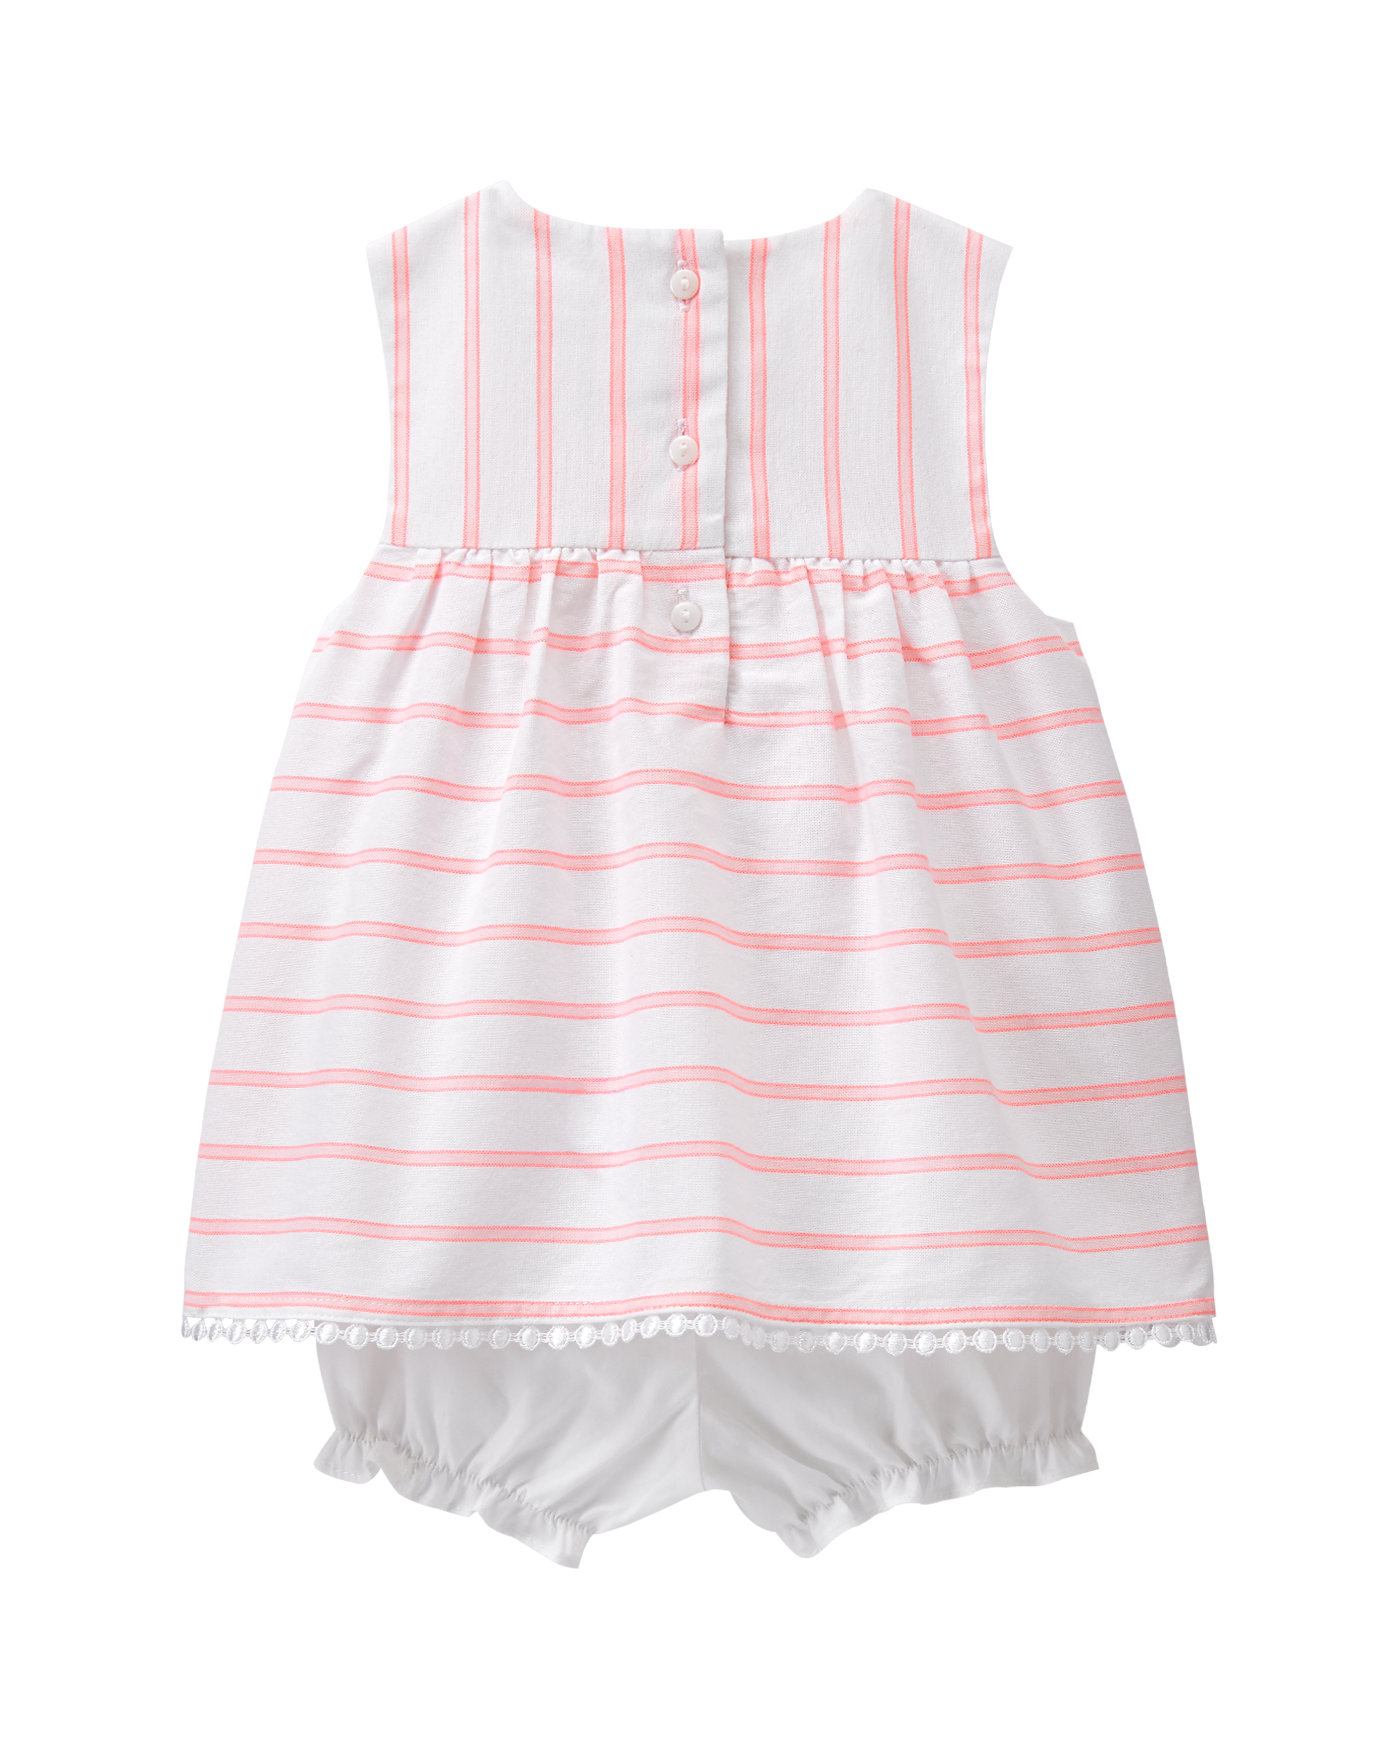 Striped Skirted 1-Piece image number 1